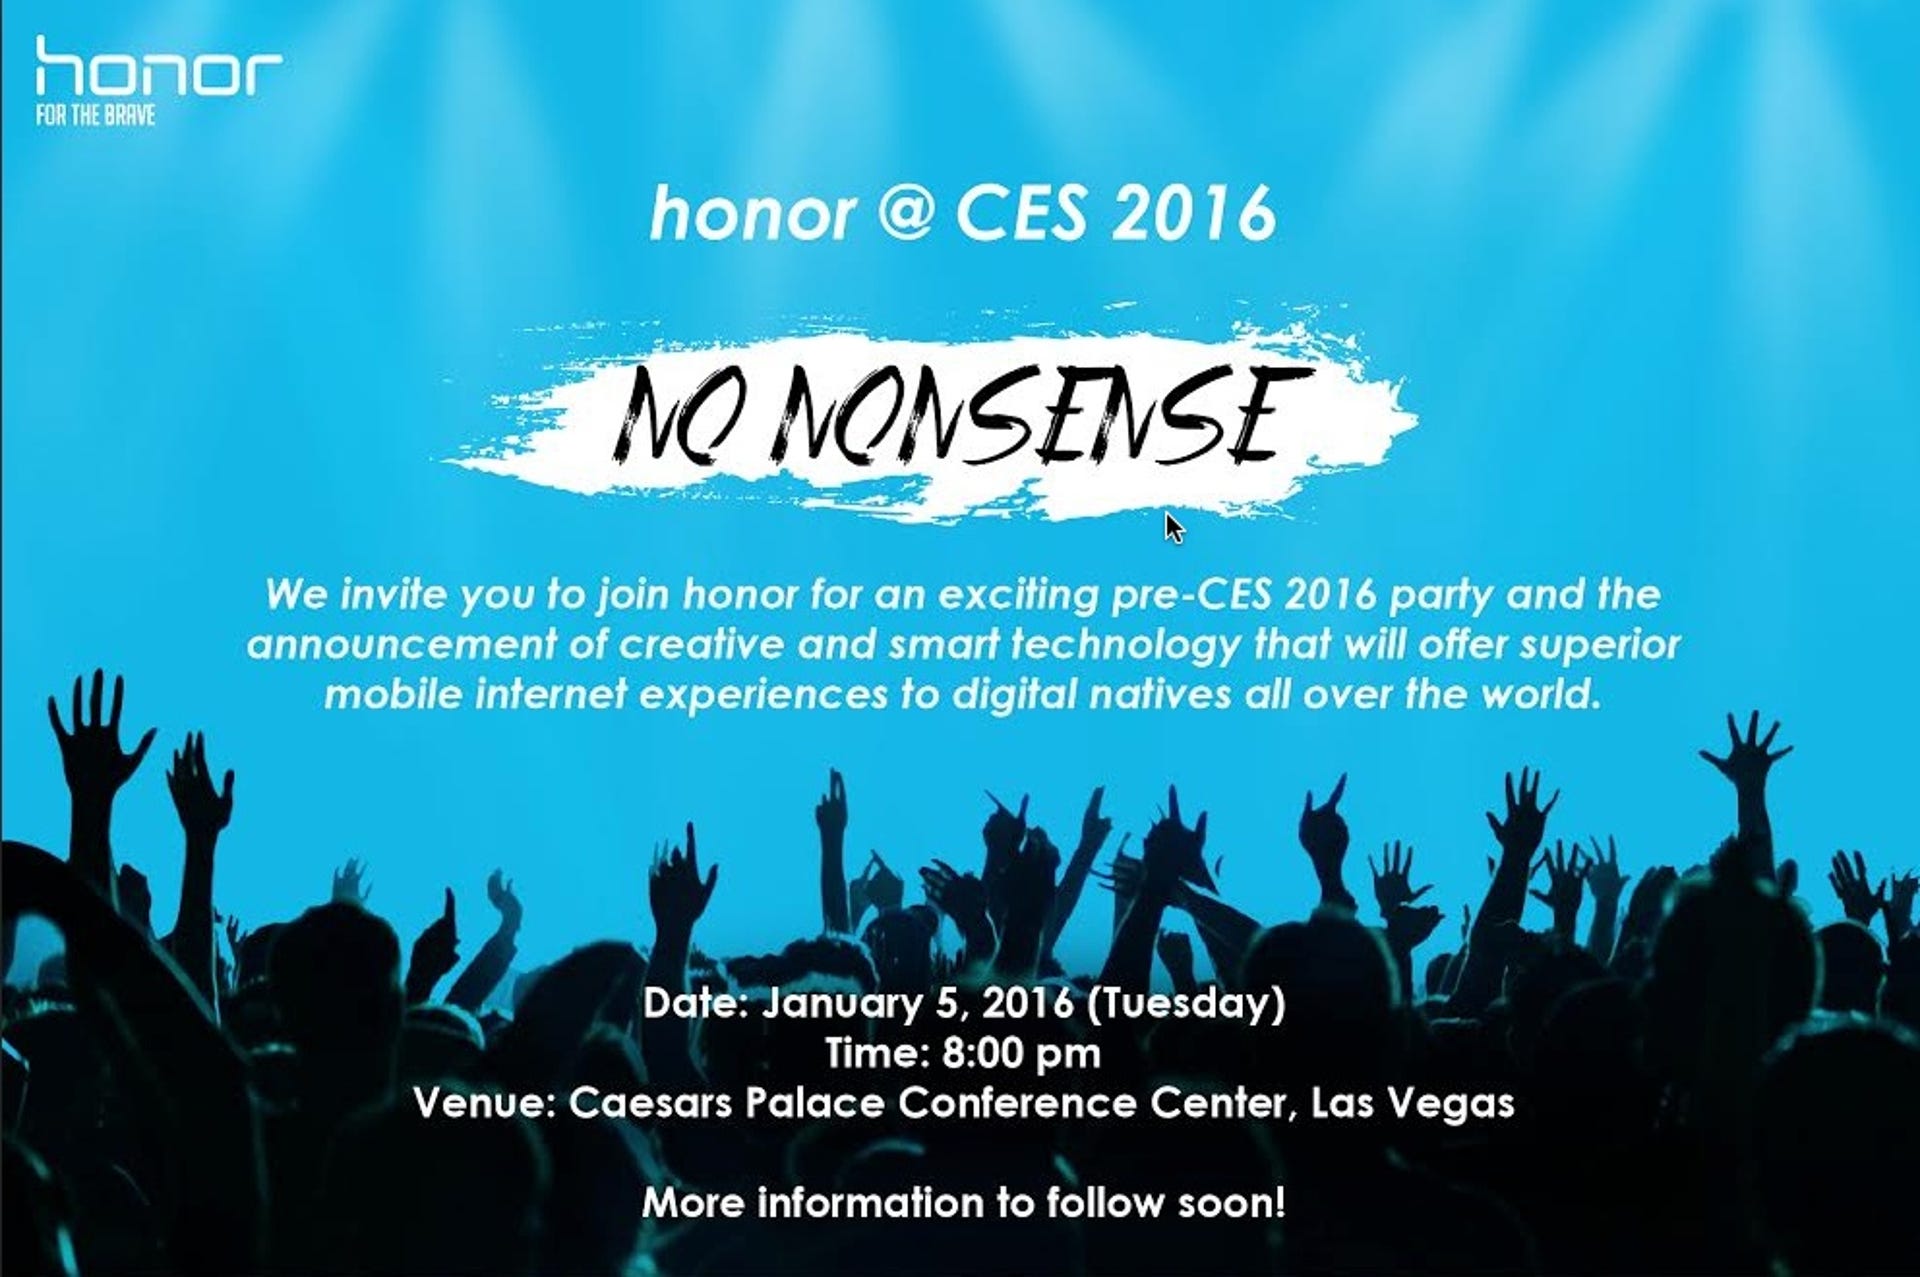 Huawei's press invitation for CES 2016.